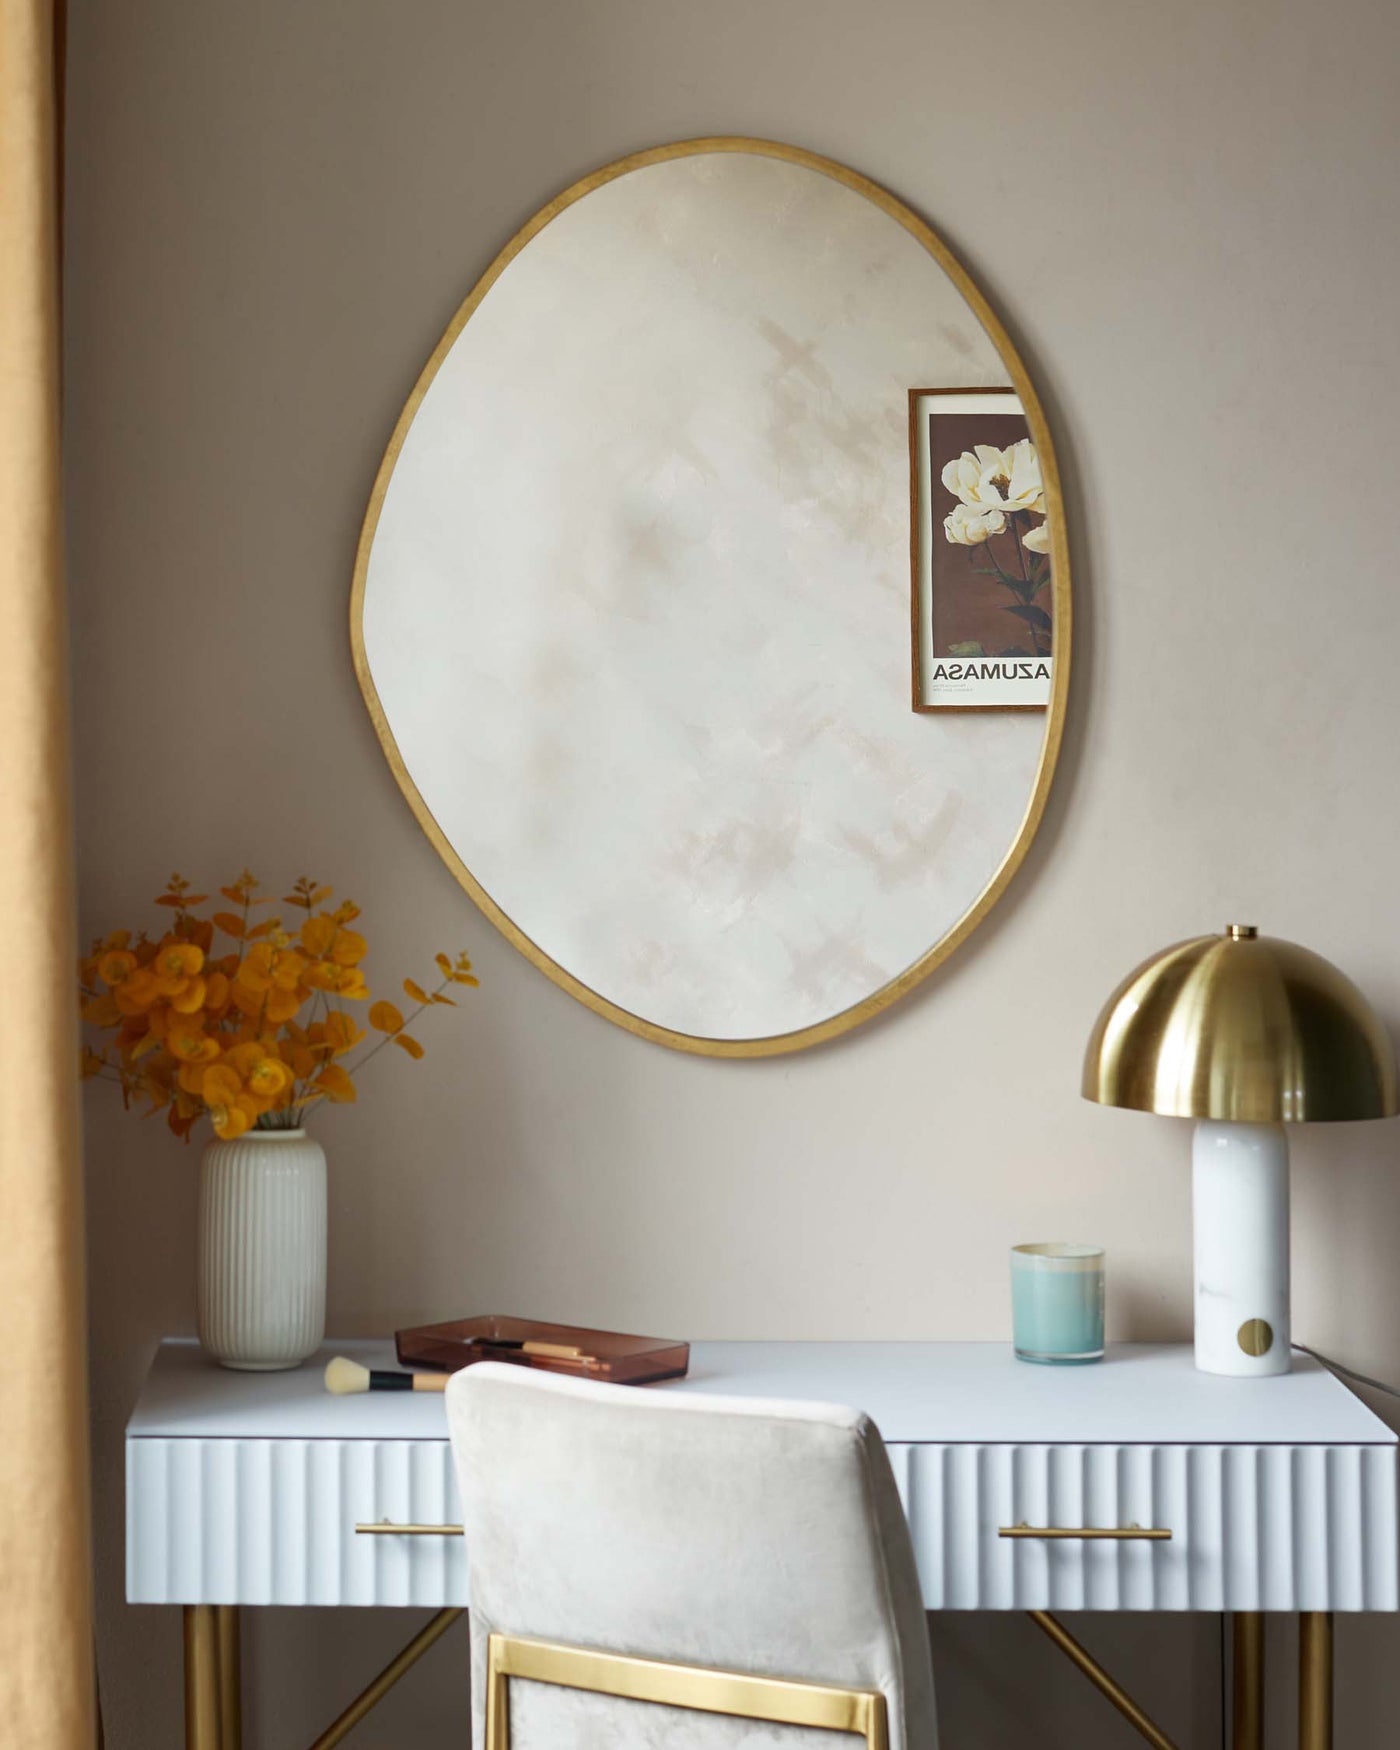 Elegant modern vanity desk with a white and pleated texture finish and gold handles, accompanied by a matching stool with a white cushion and gold frame. The furniture is complemented by a large, oval-shaped mirror with a subtle gold frame on the wall.